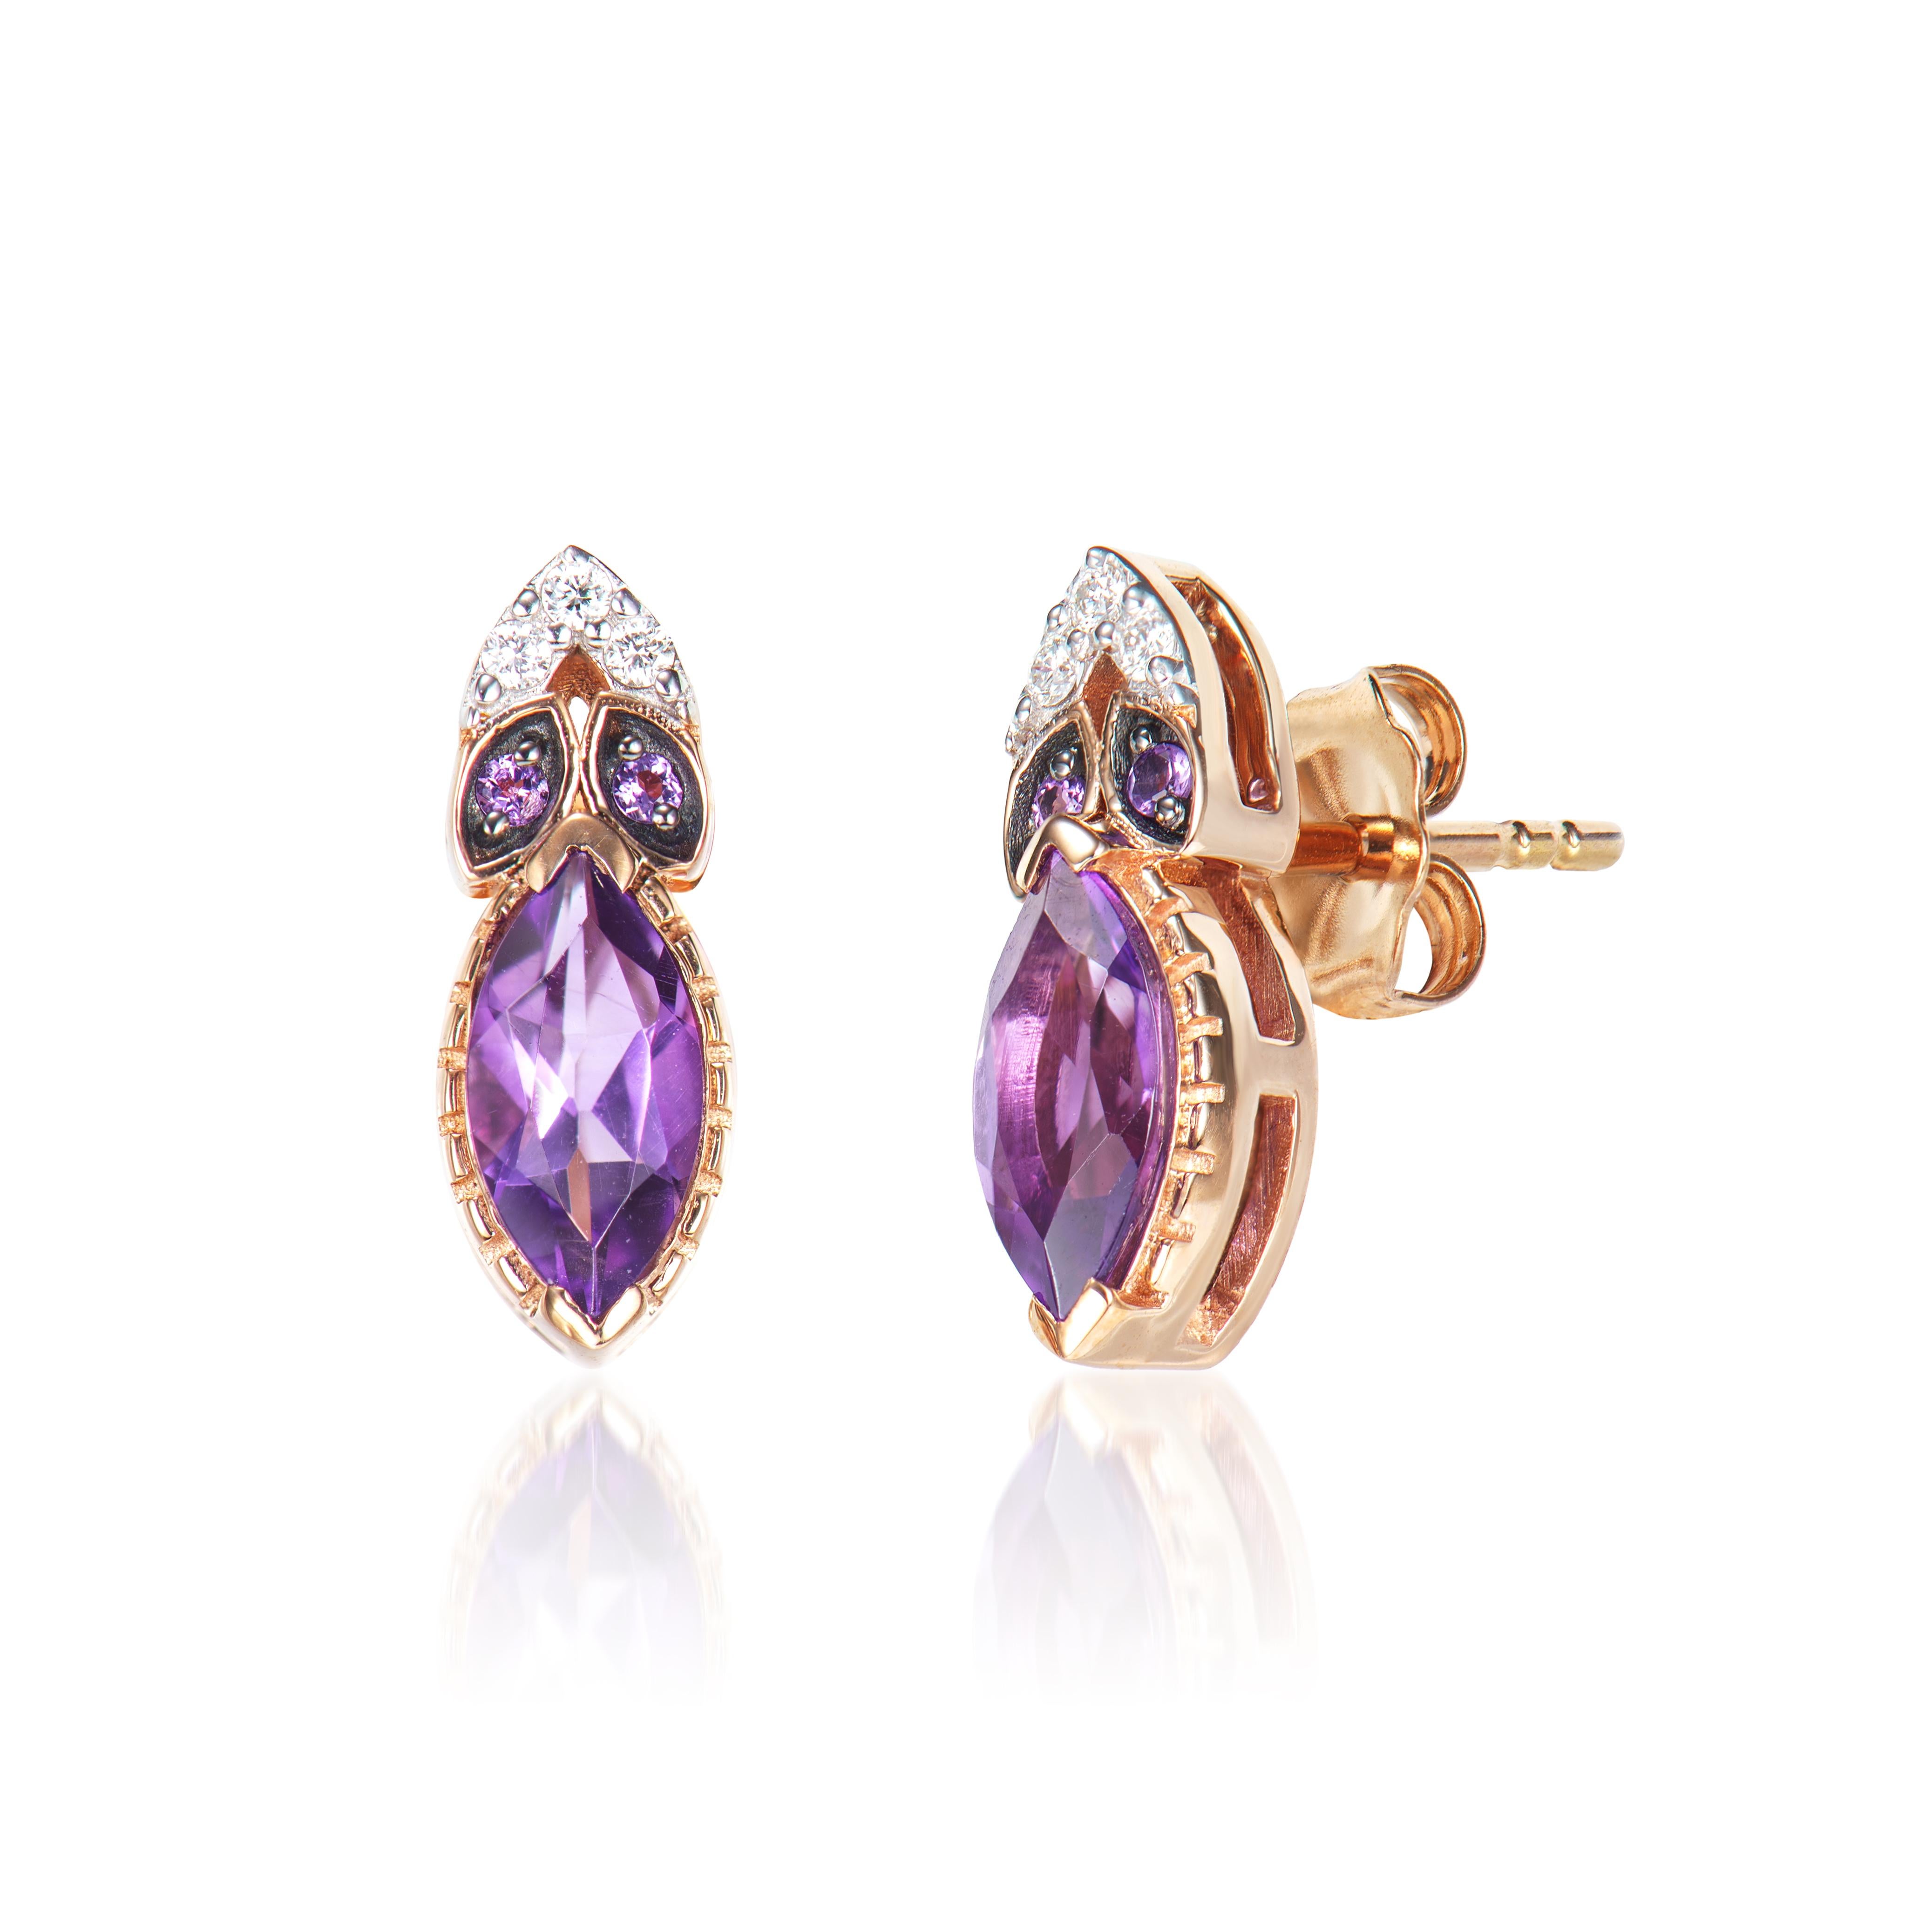 Marquise Cut 0.90 Carat Amethyst Stud Earrings in 14Karat Rose Gold with White Diamond. For Sale